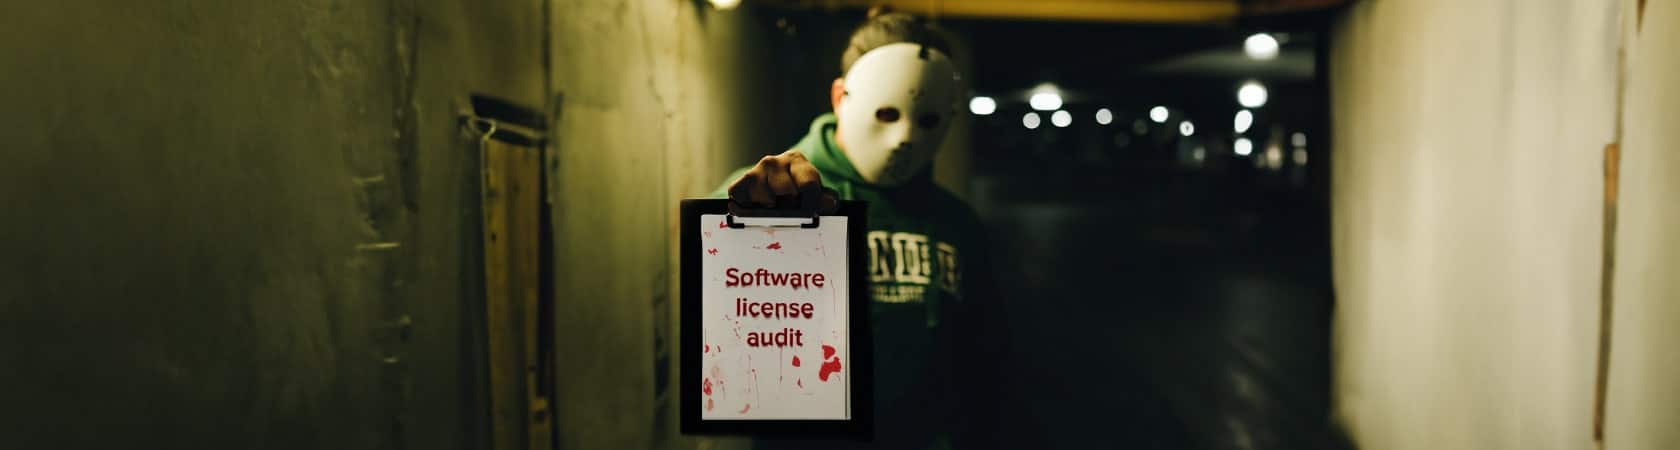 Don’t Get Spooked by IBM® Software License Audits: A Checklist for IT Leaders